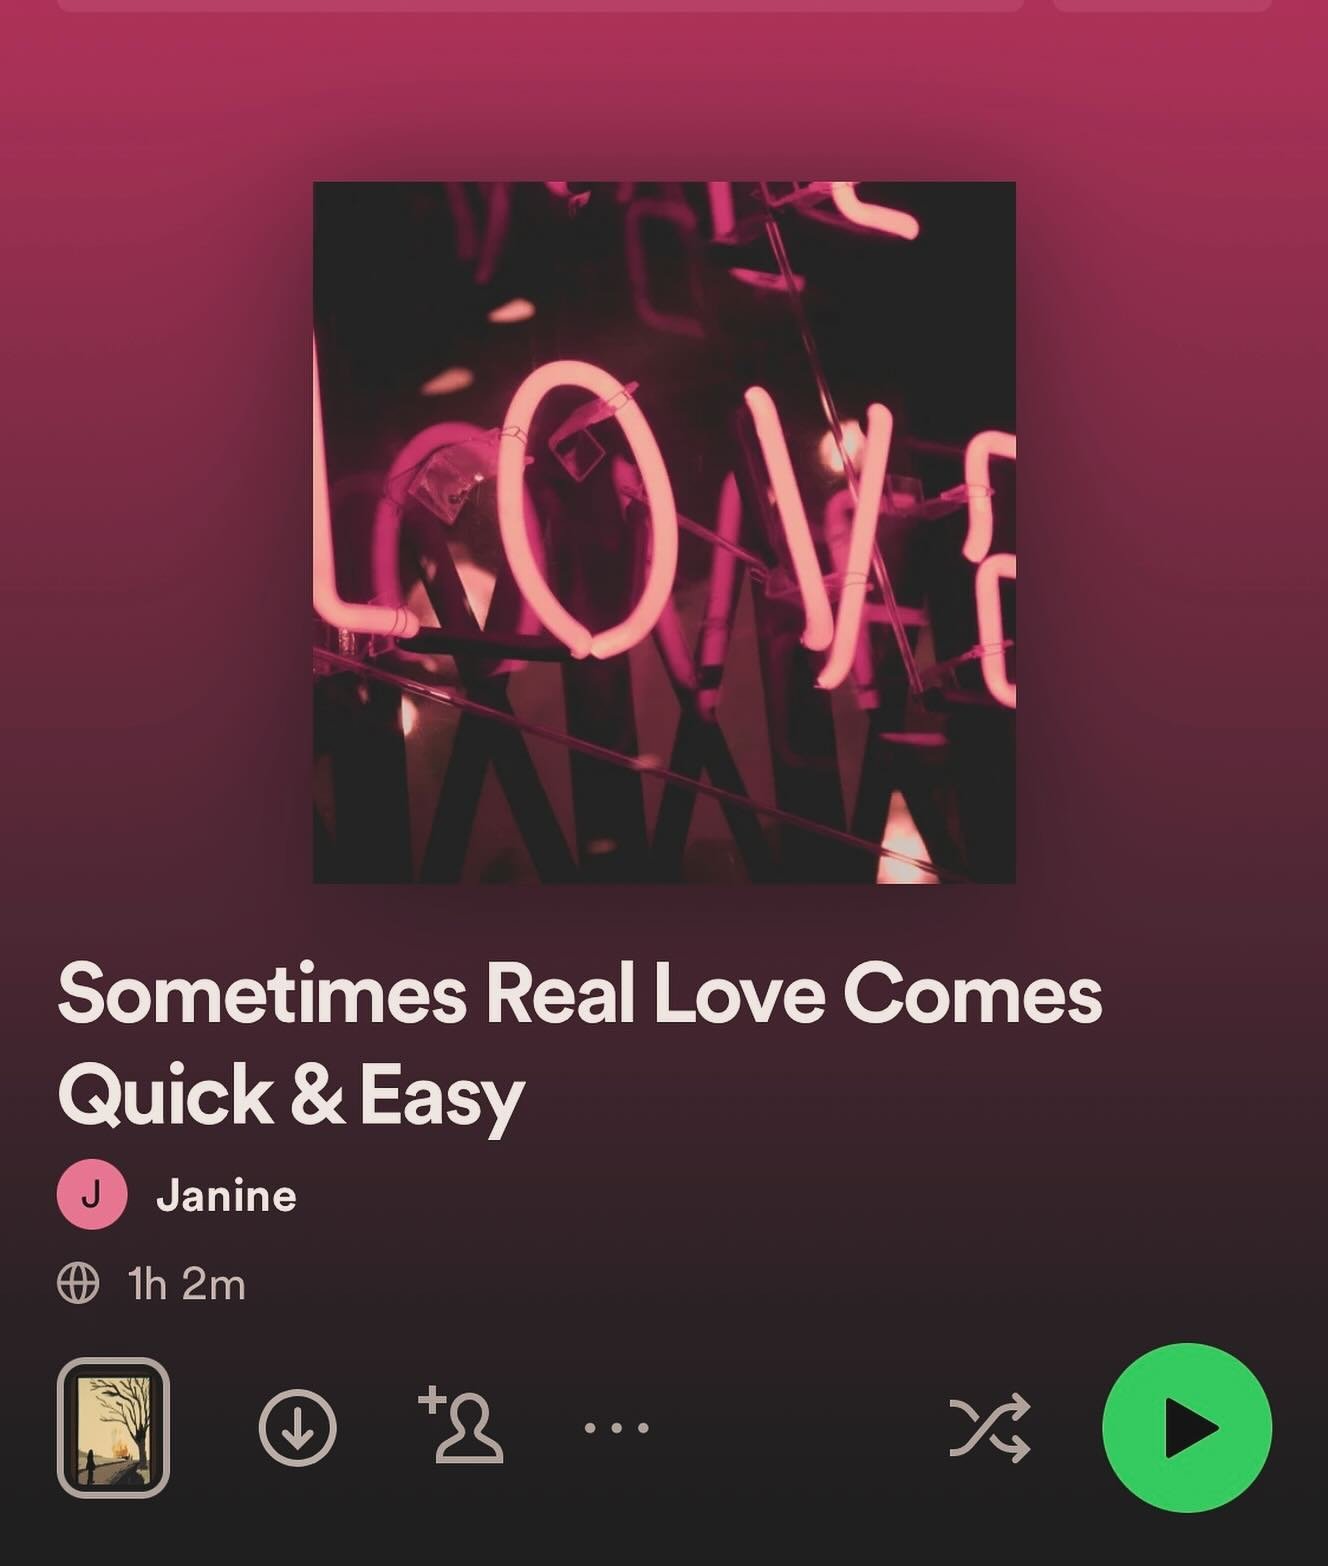 To celebrate the launch of &lsquo;Sometimes Real Love Comes Quick &amp; Easy&rsquo; 💗 I&rsquo;ve put together a lil&rsquo; playlist of my favourite love songs. Far from cutesy, this mini-collection explores contrived feeling, ambivalence, yearning, 